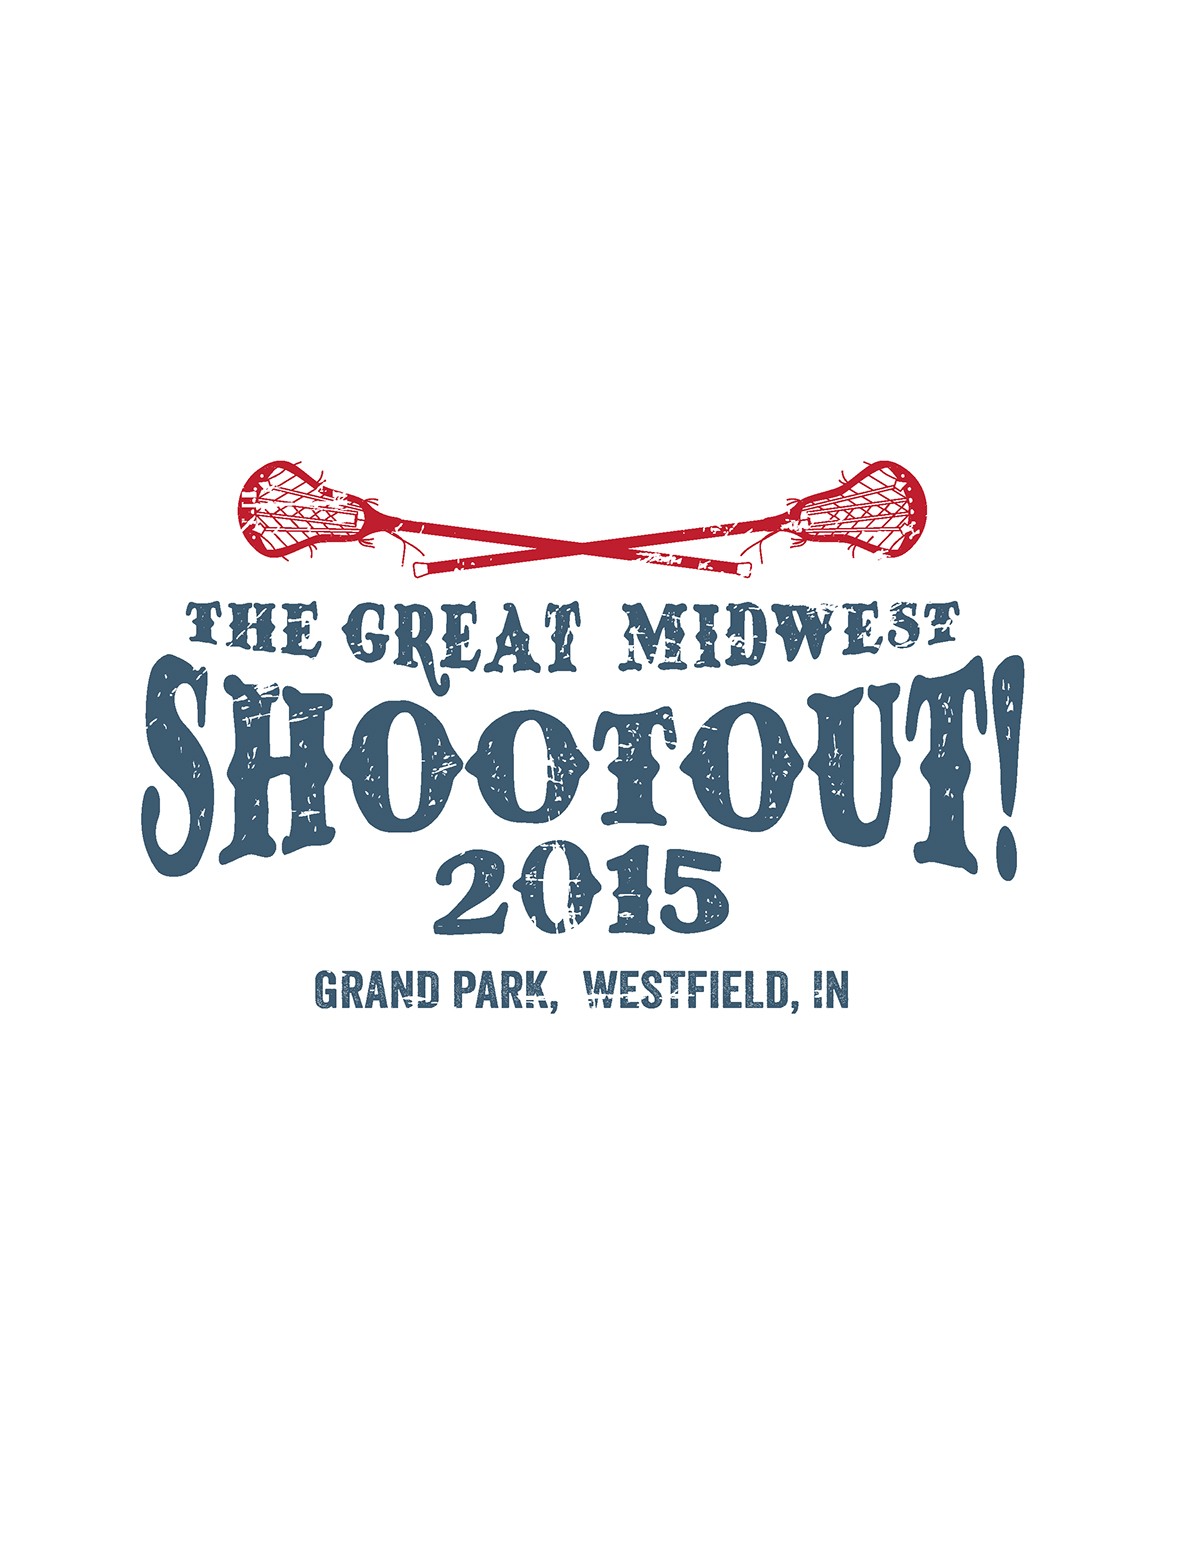 t-shirt tshirt tee Tee-shirt shirts logo lacrosse sports sport stick midwest indiana indianapolis grand park Westfield